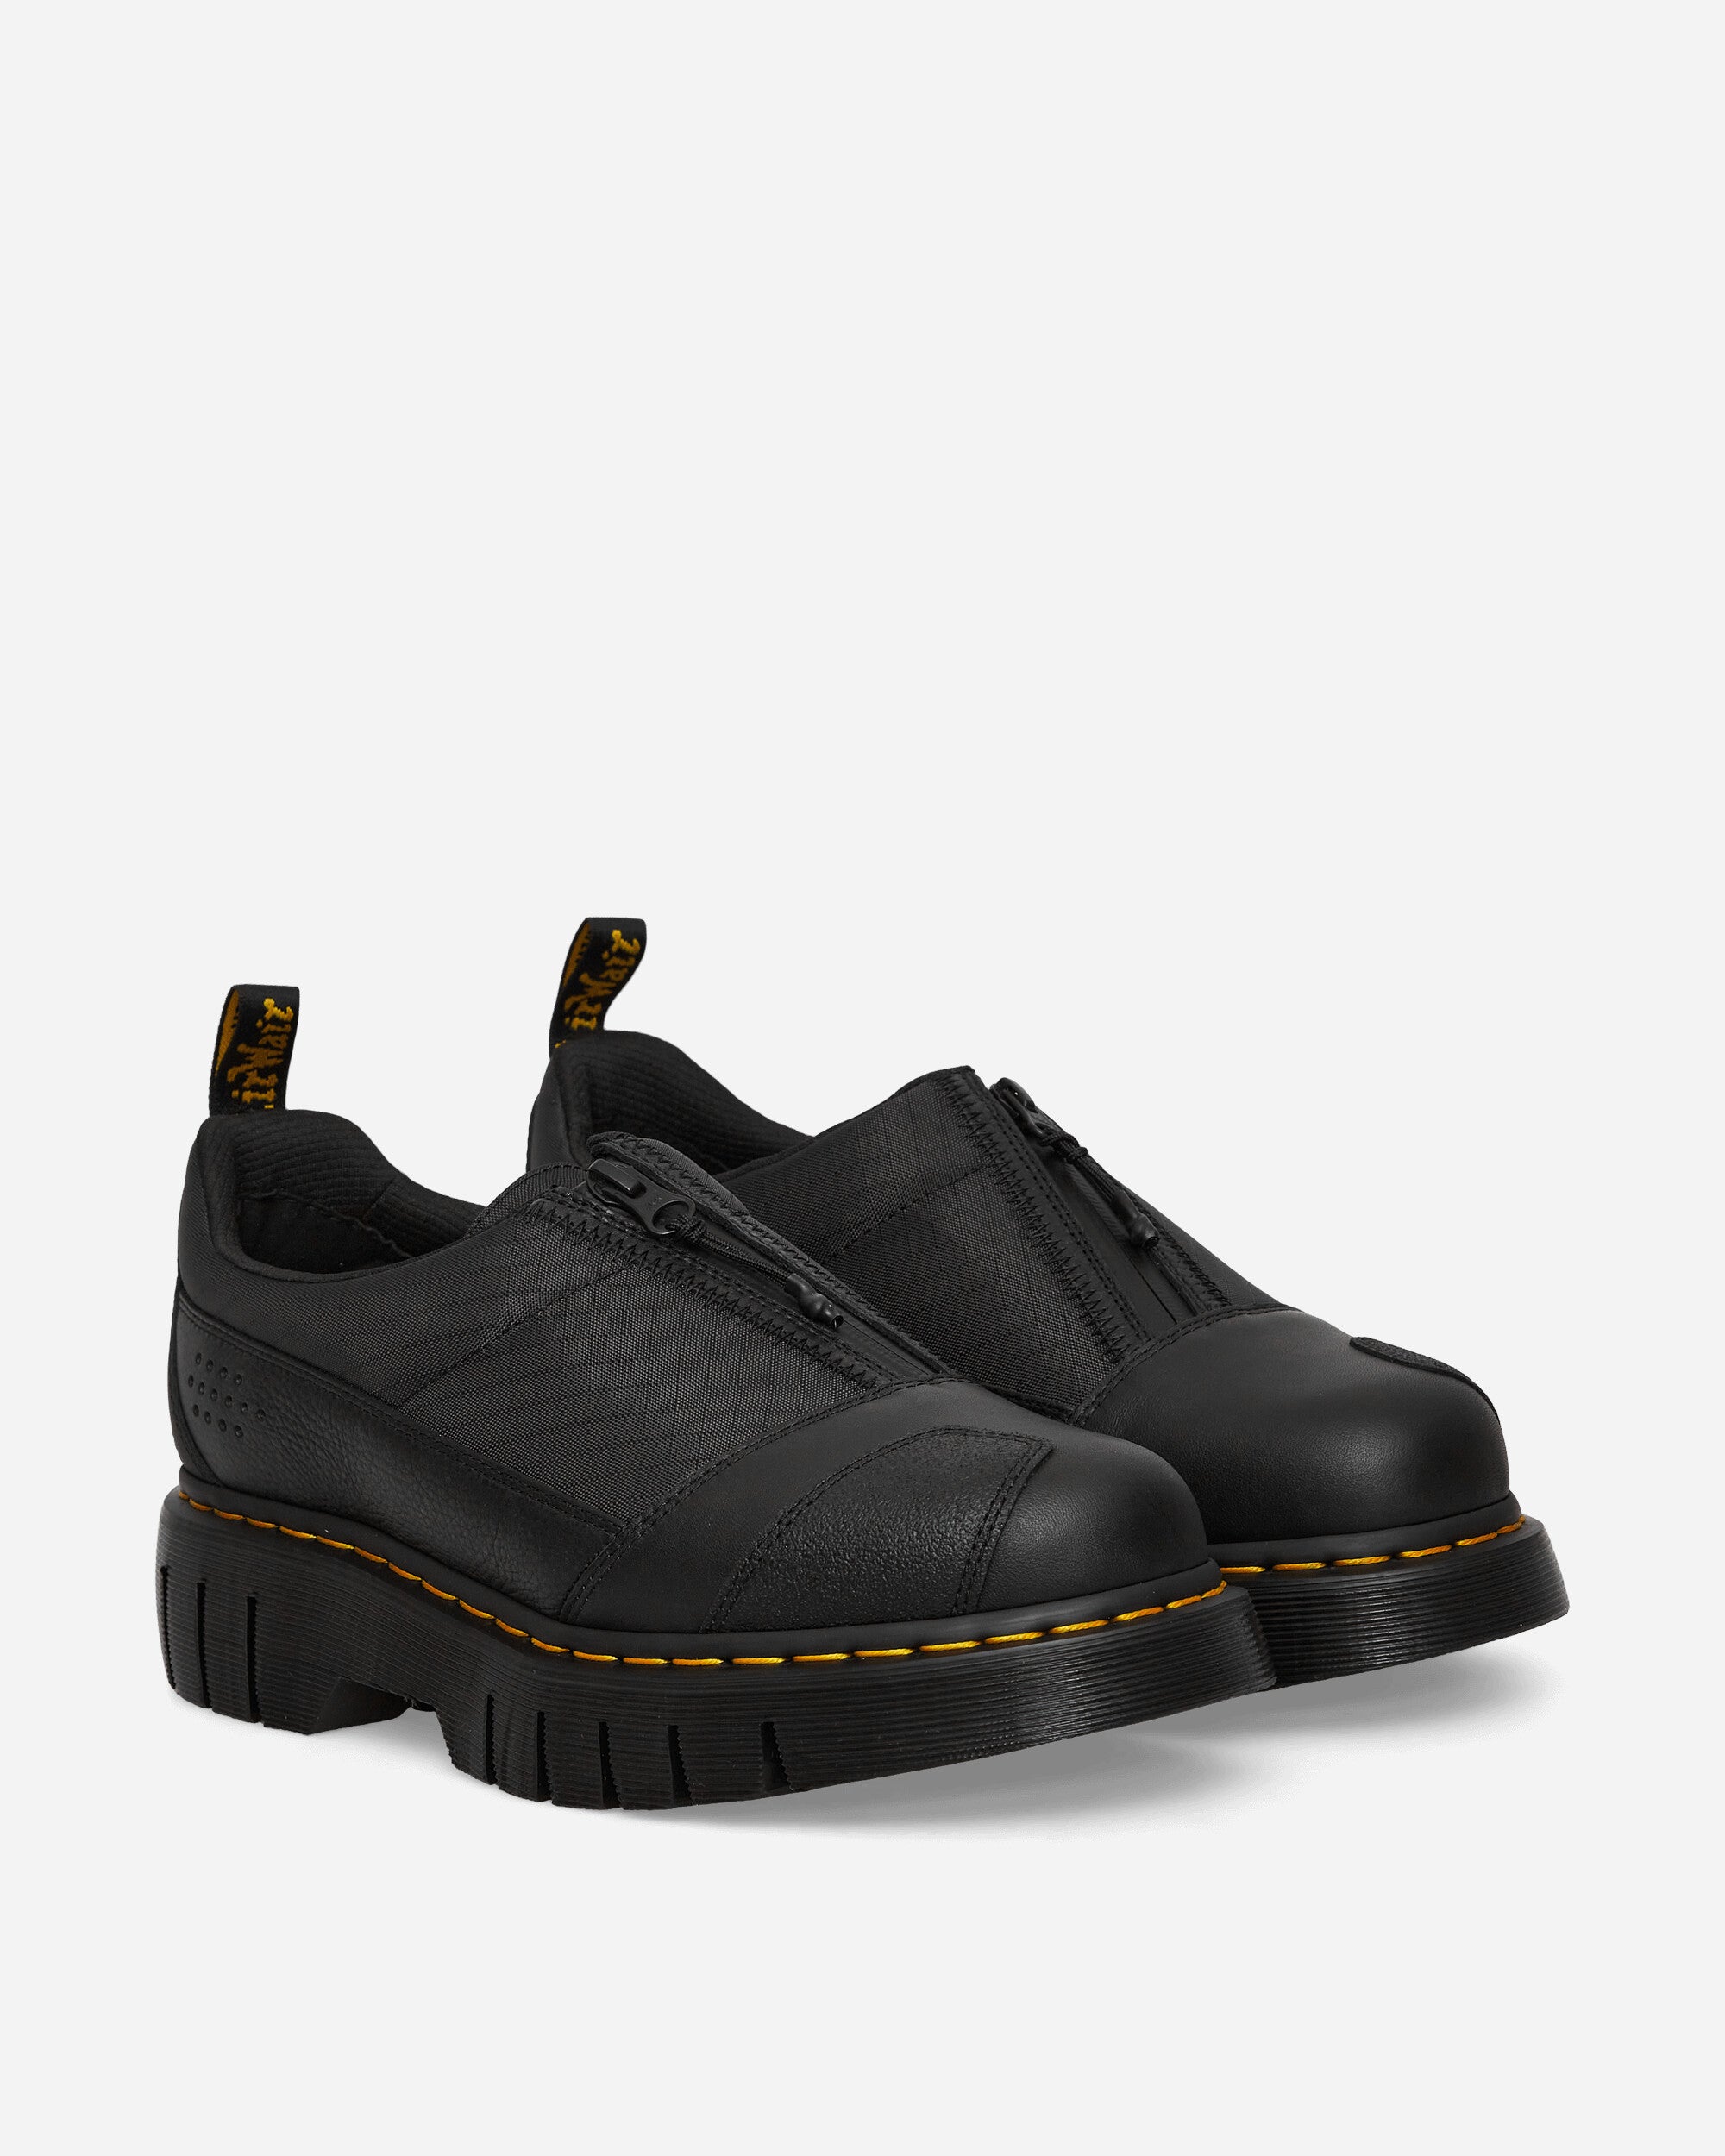 Dr. Martens 1461 Beta Clubwedge Black Classic Shoes Laced Up 31796001 001